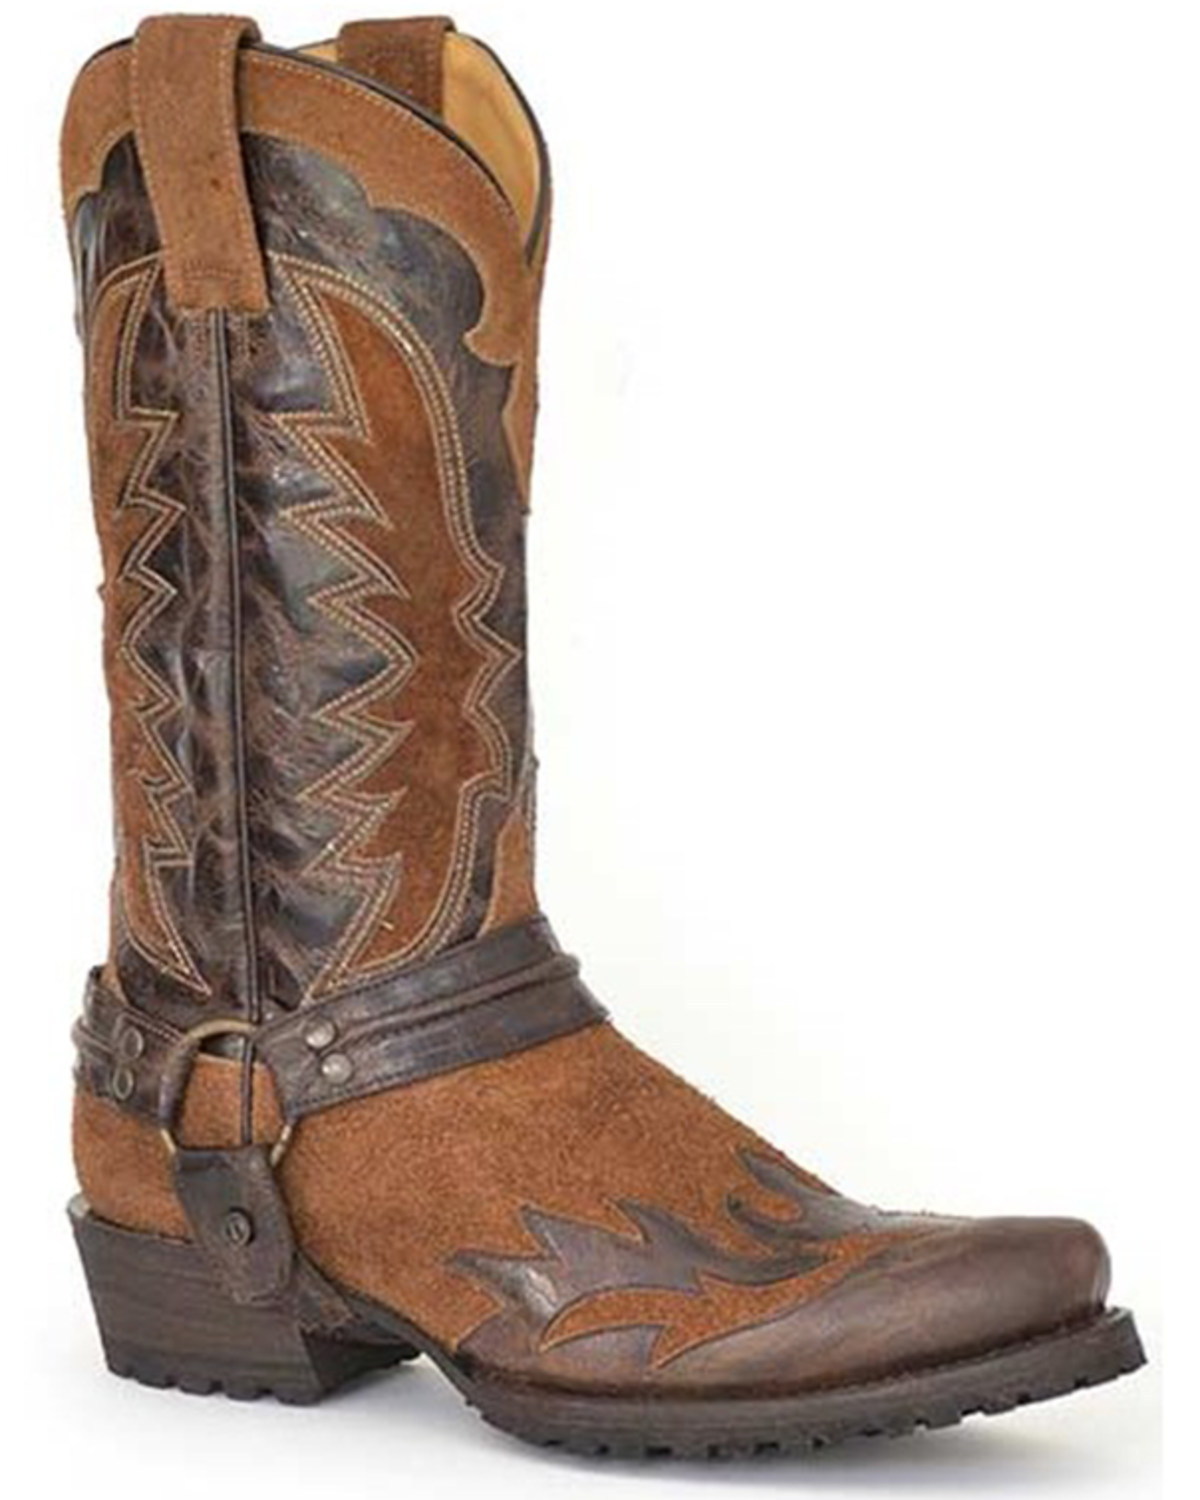 Stetson Men's Outlaw Wings Motorcycle Boots - Medium Toe